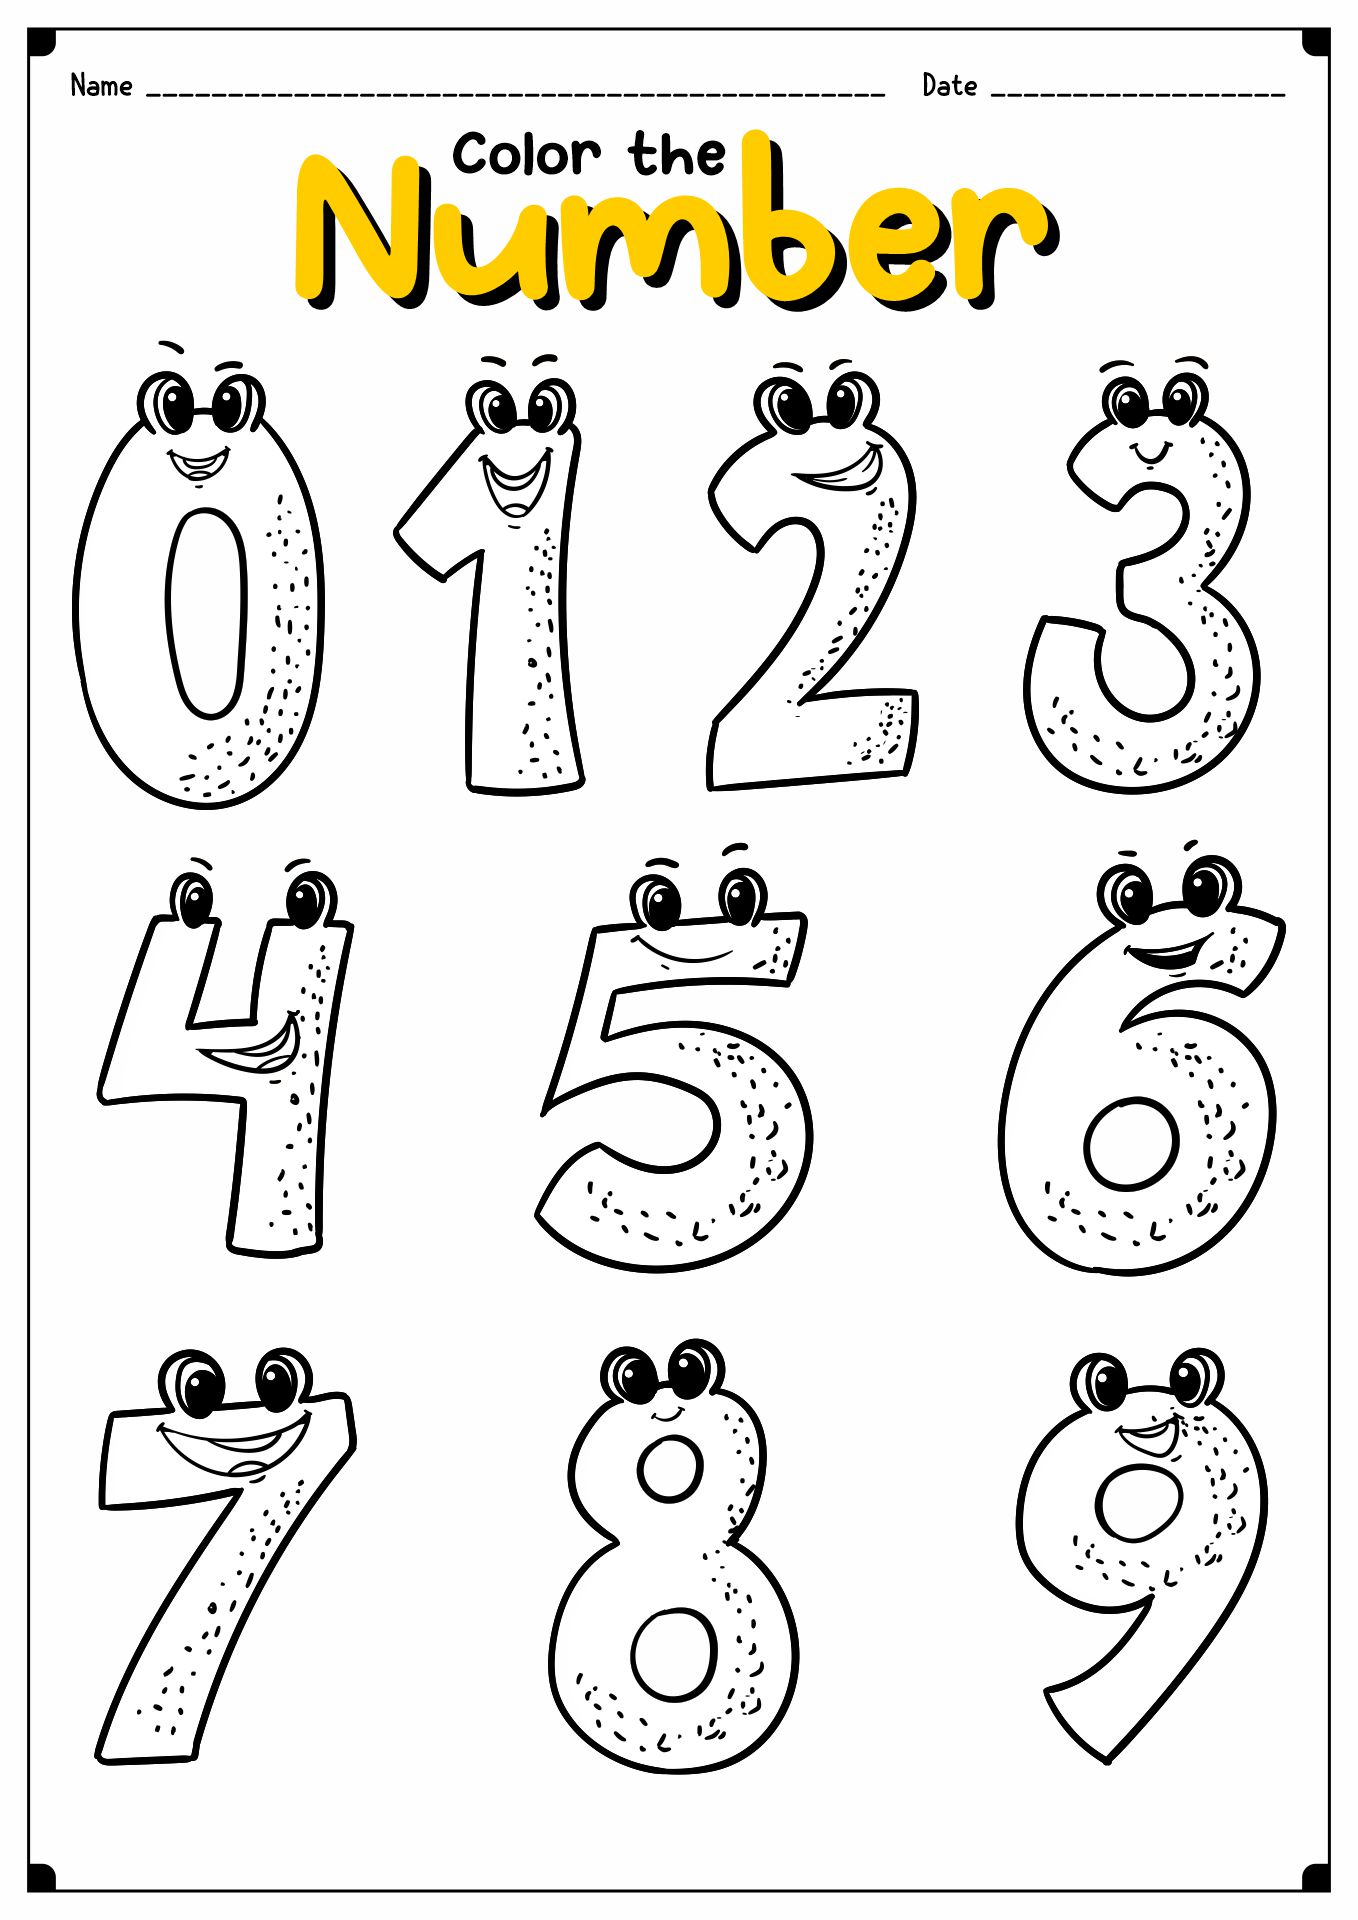 Free Printable Number Coloring Pages Image